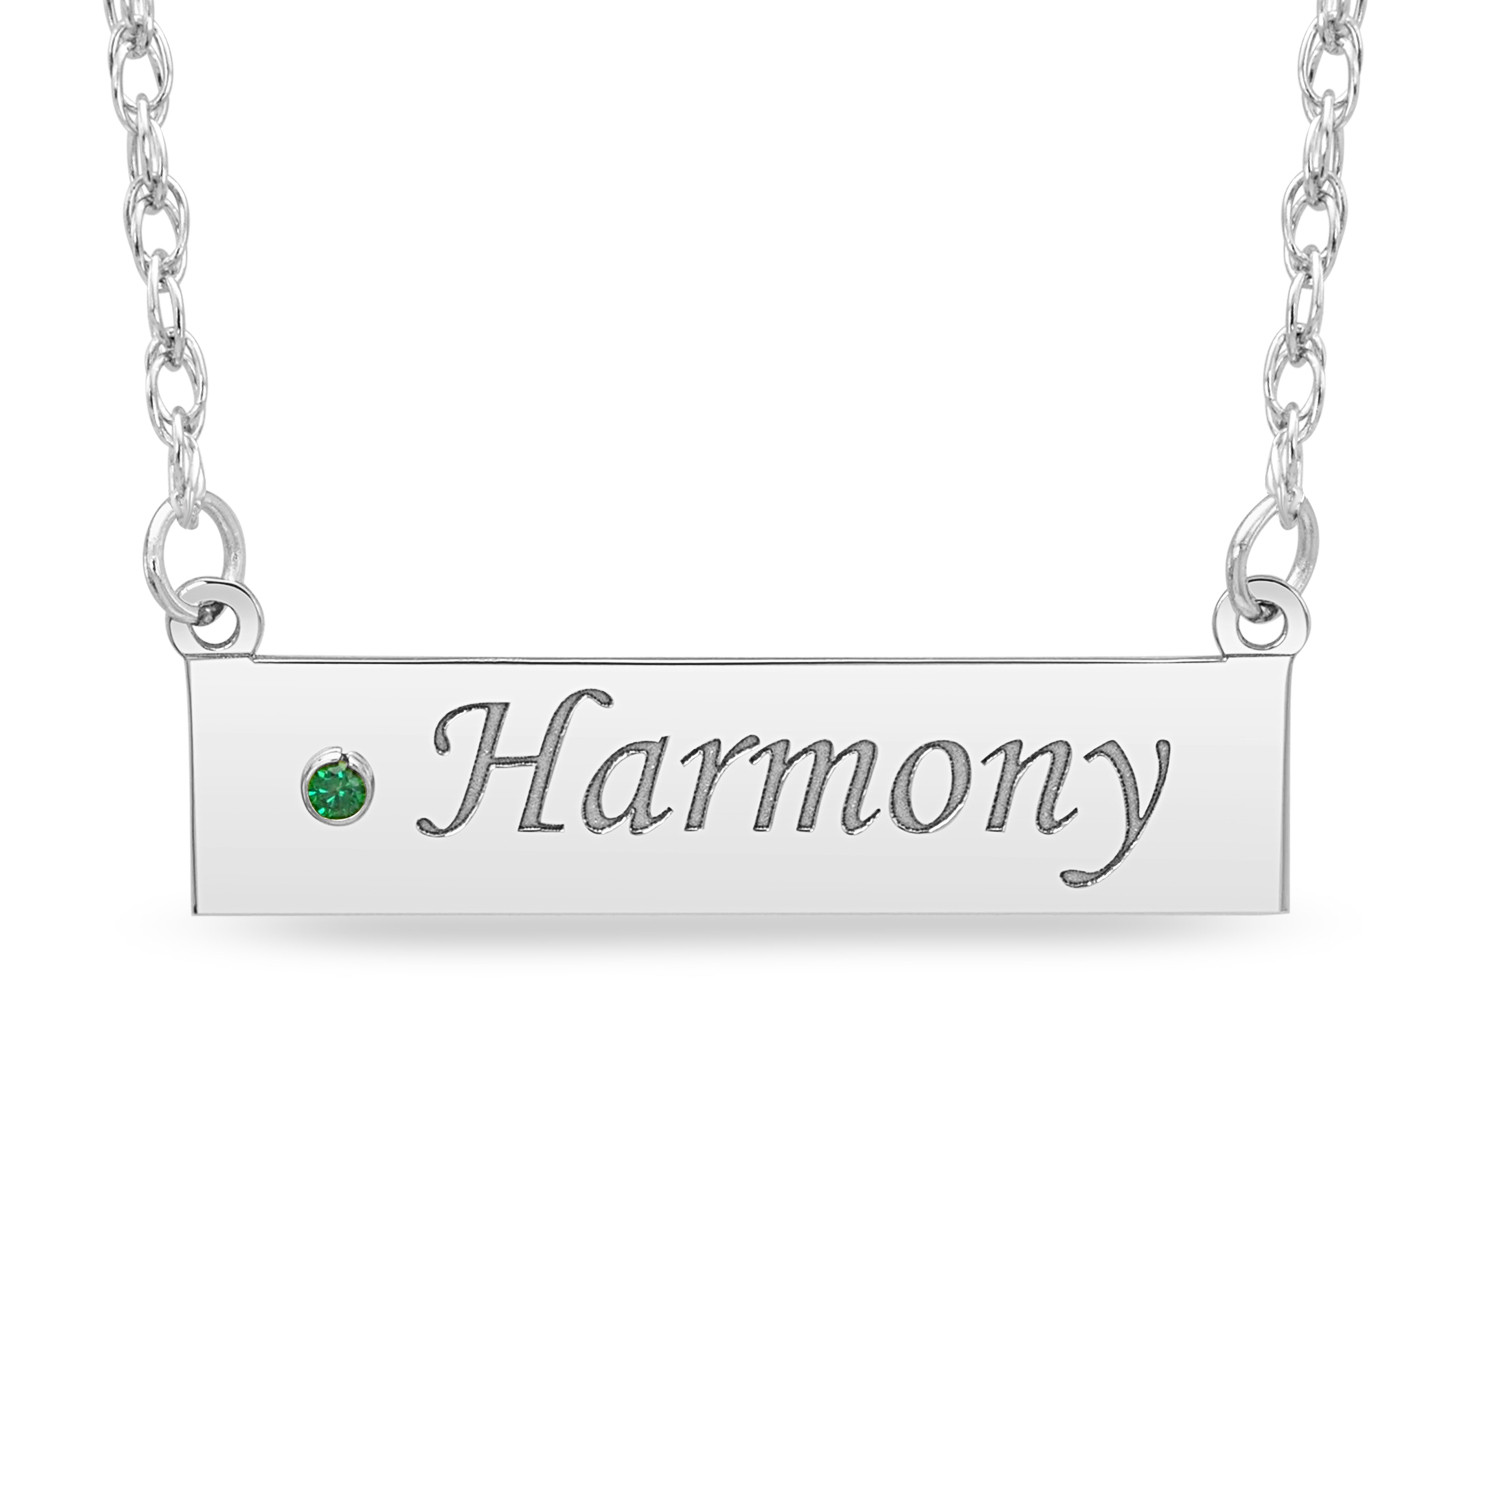 Simulated Birthstone and Engravable Name Bar Necklace (1 Line and